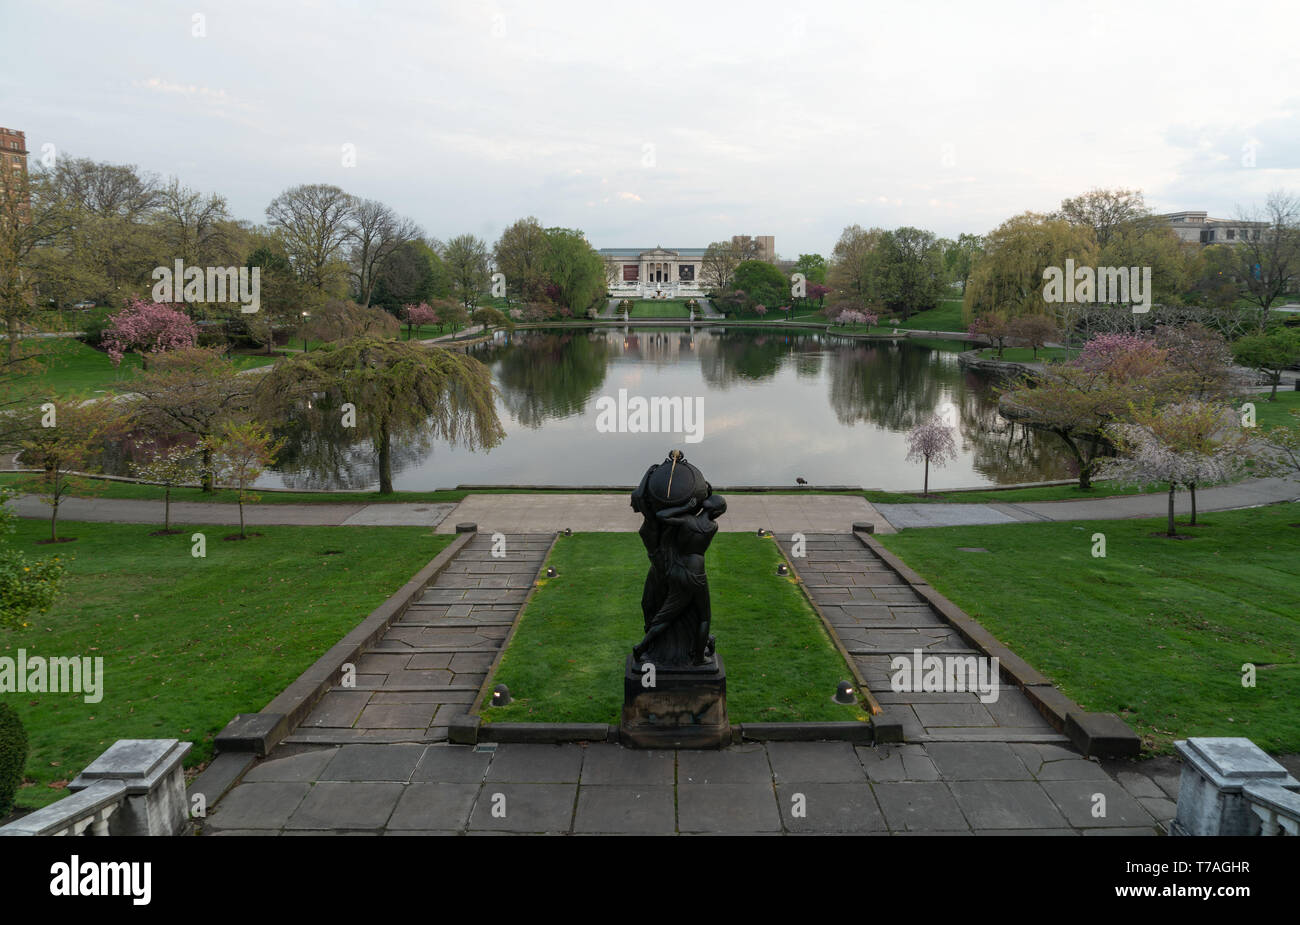 Cleveland, Ohio/USA - May 1, 2019: On the steps of the Wade Park Lagoon with the statue in the foreground and The Cleveland Museum of Art in the dista Stock Photo